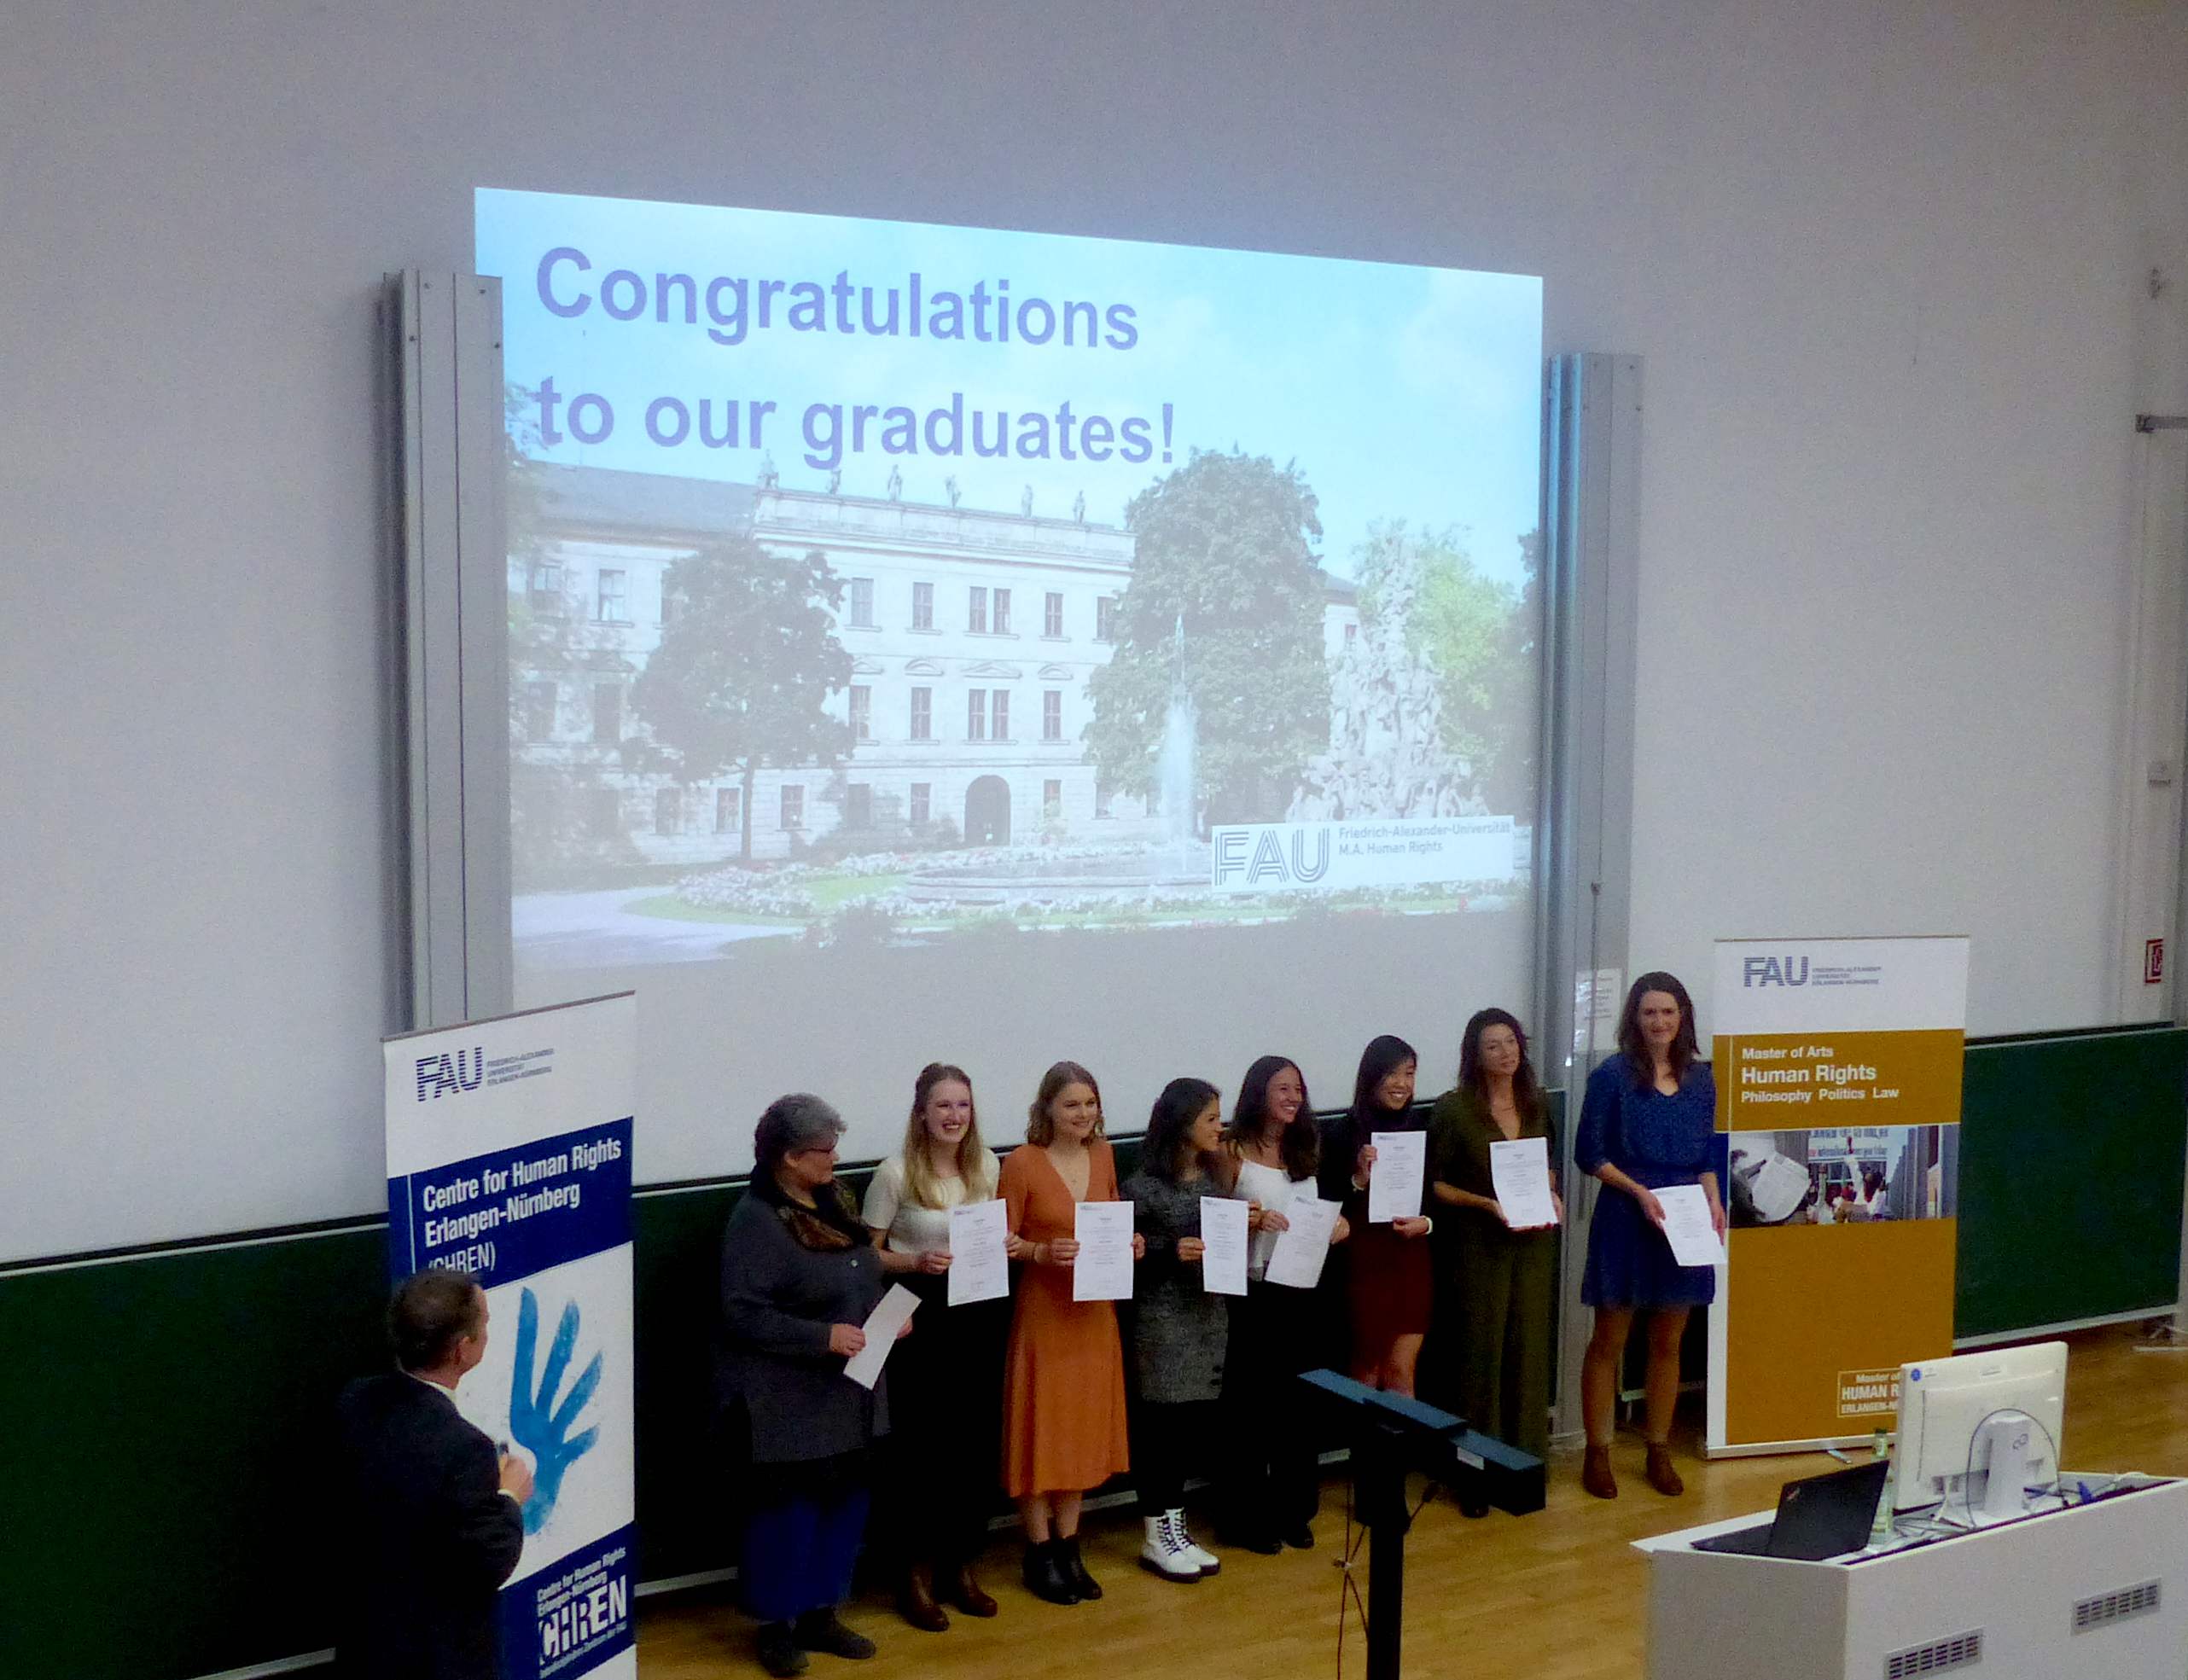 Picture of graduates at their graduation ceremony in front of a PowerPoint "Congratulations to our graduates!" holding their diplomas.